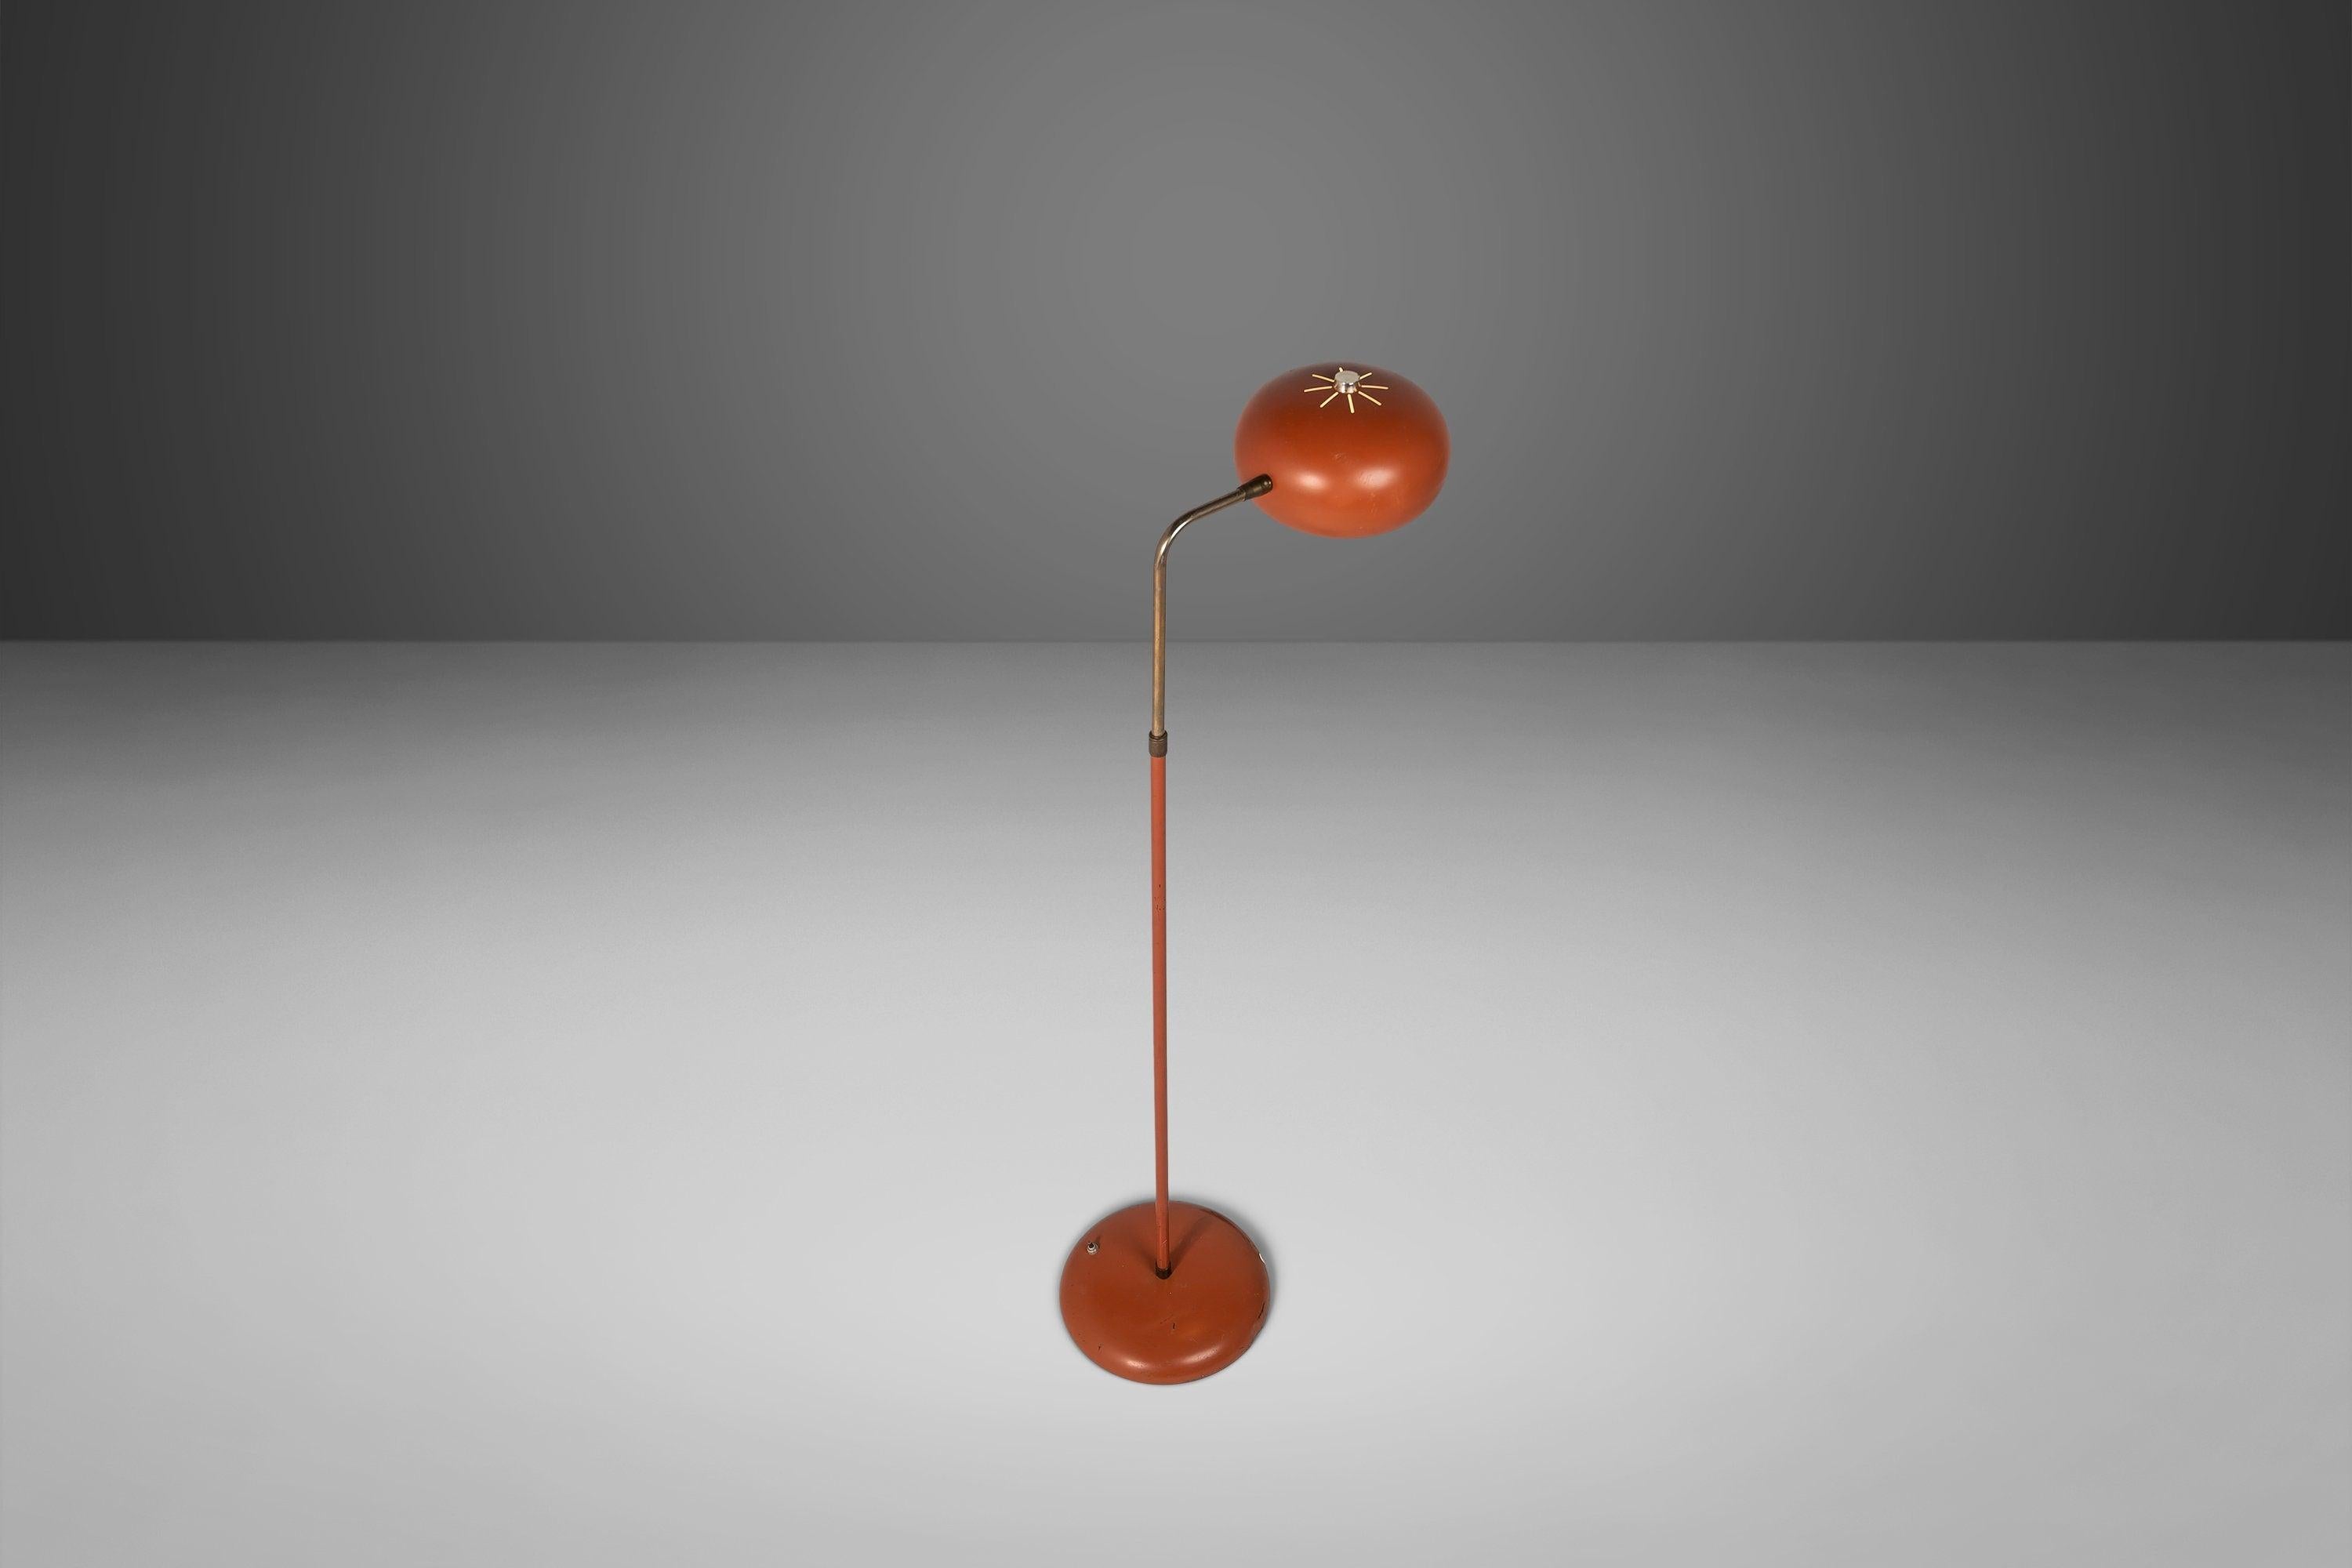 Mid-Century Modern Vintage Atomic Clover Lamp Company Floor Lamp in Original Coral Paint, c. 1950s